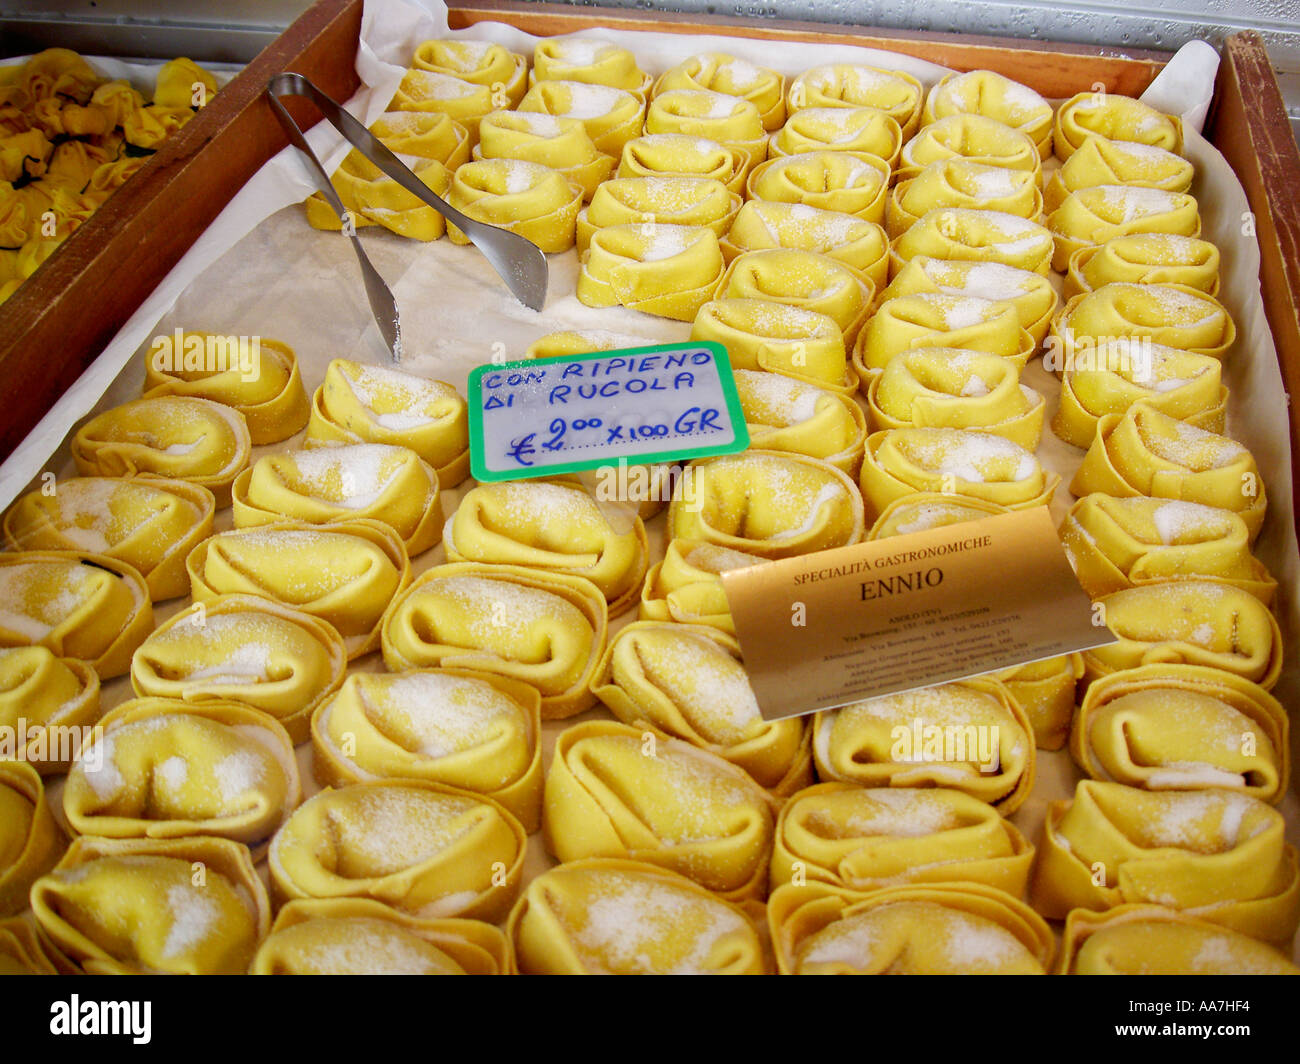 Sweet and savoury pastry specialities on sale in the delicatessen in the ancient town centre of Asolo, Treviso, Italy Stock Photo